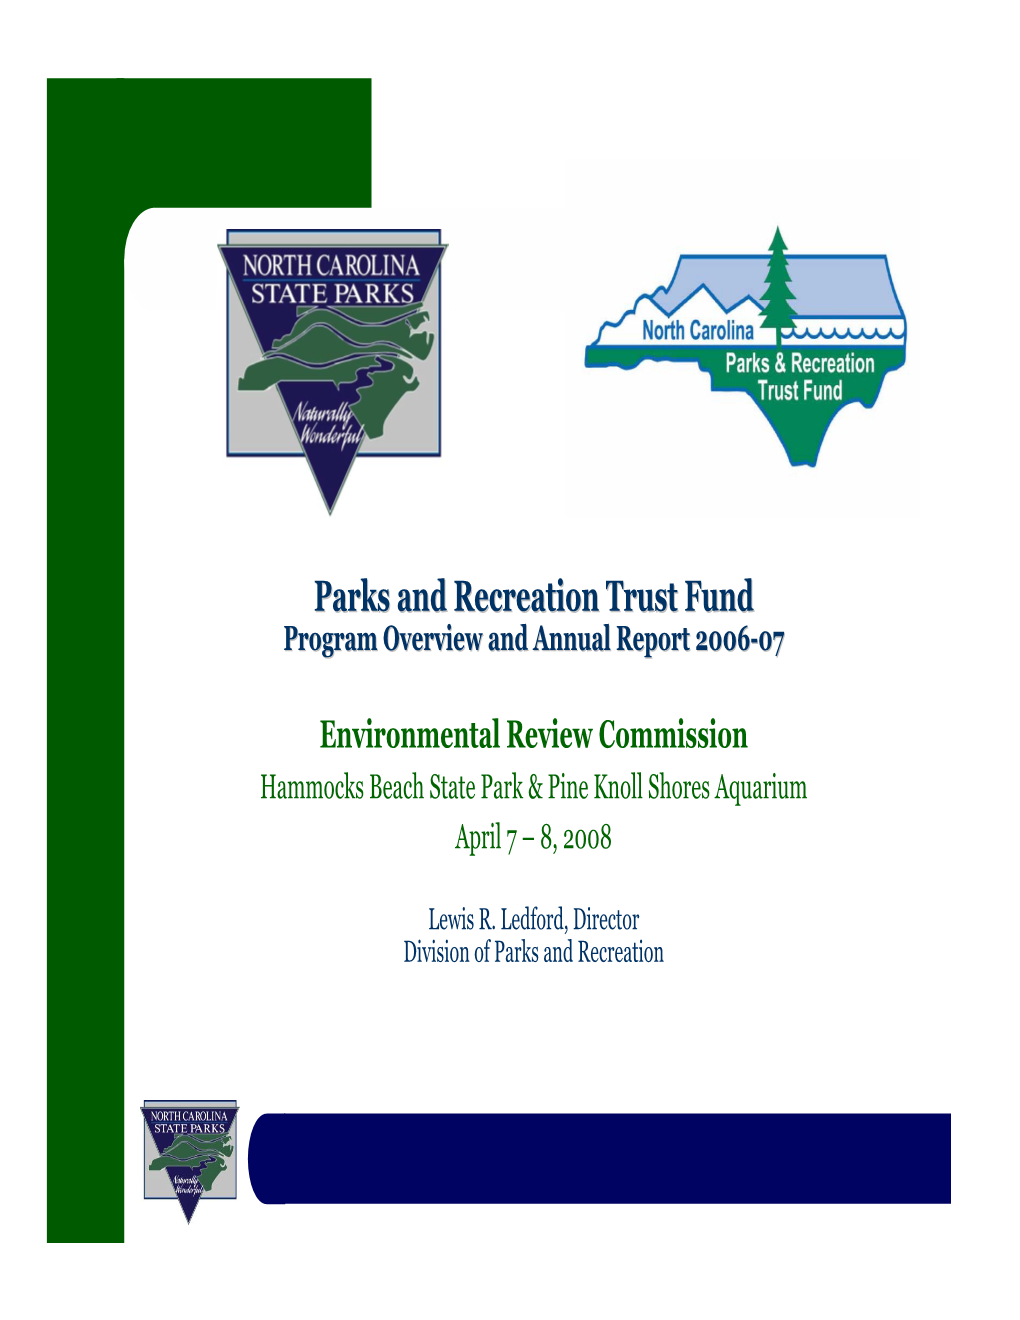 Parks and Recreation Trust Fund Program Overview and Annual Report 2006-07